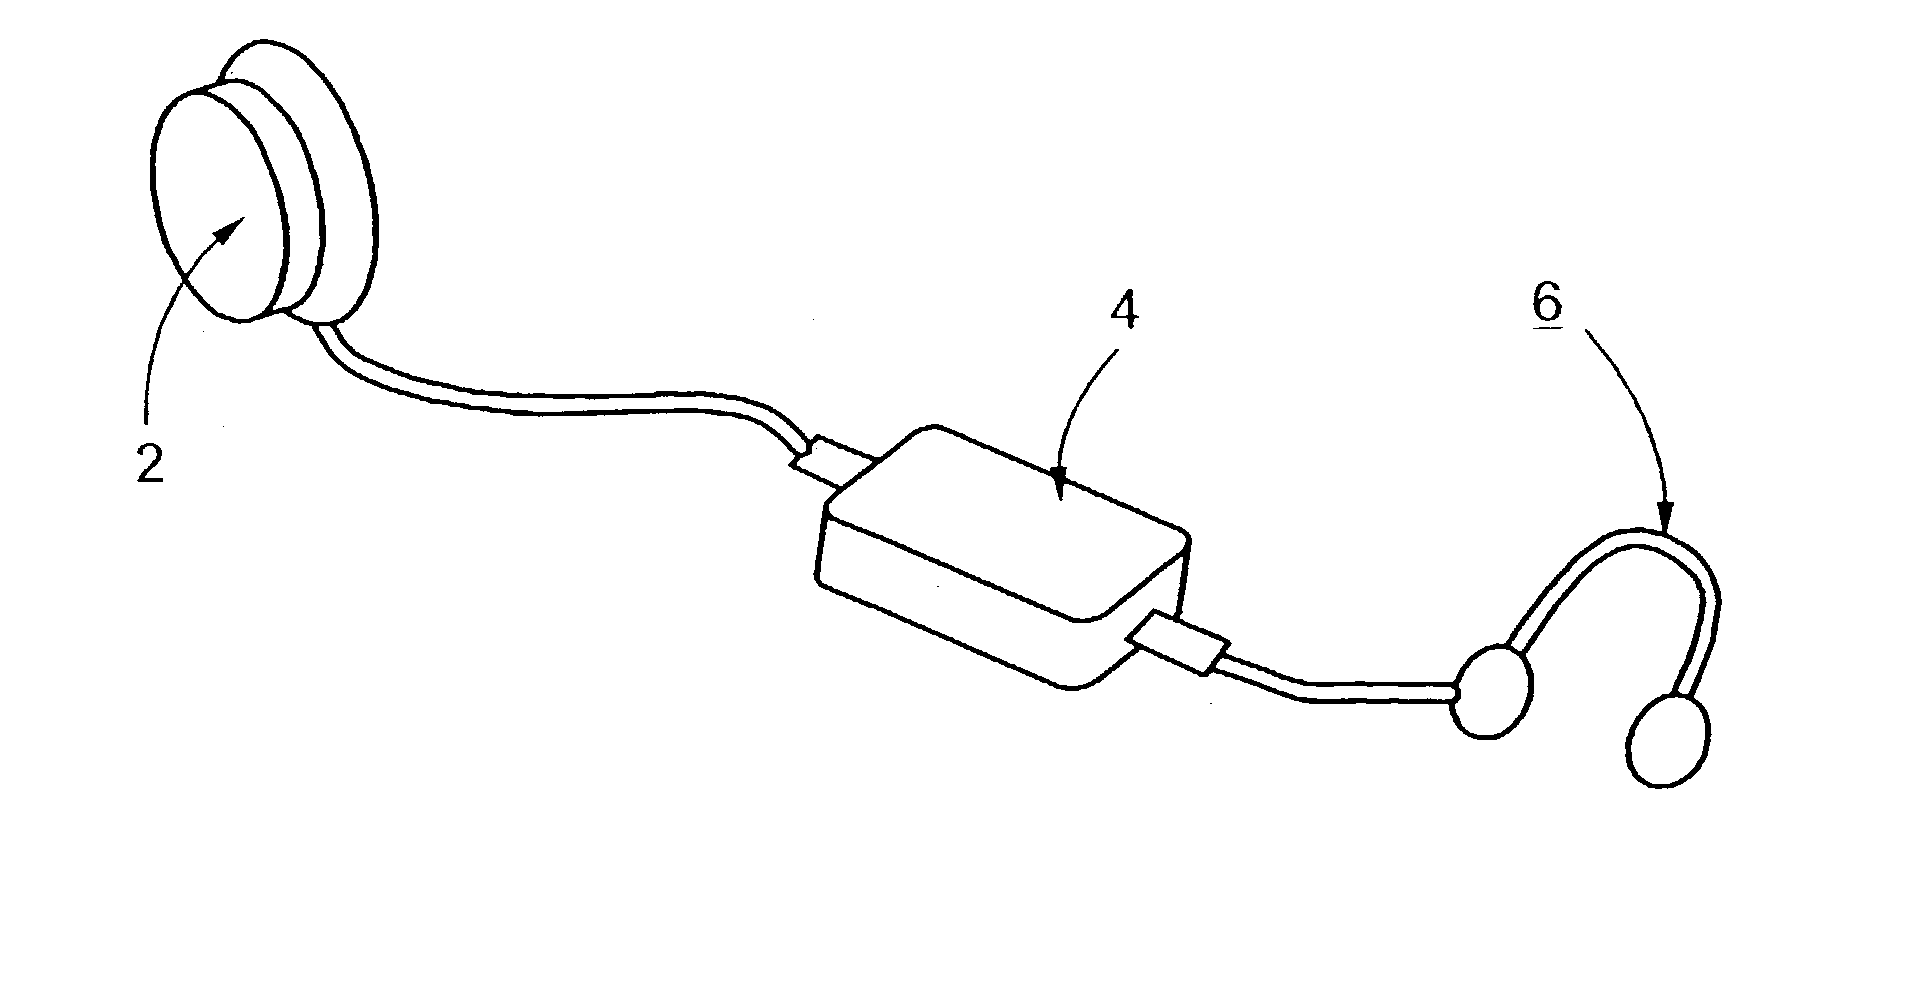 Chest piece for stethoscopes, and methods of utilizing stethoscopes for monitoring the physiological conditions of a patient